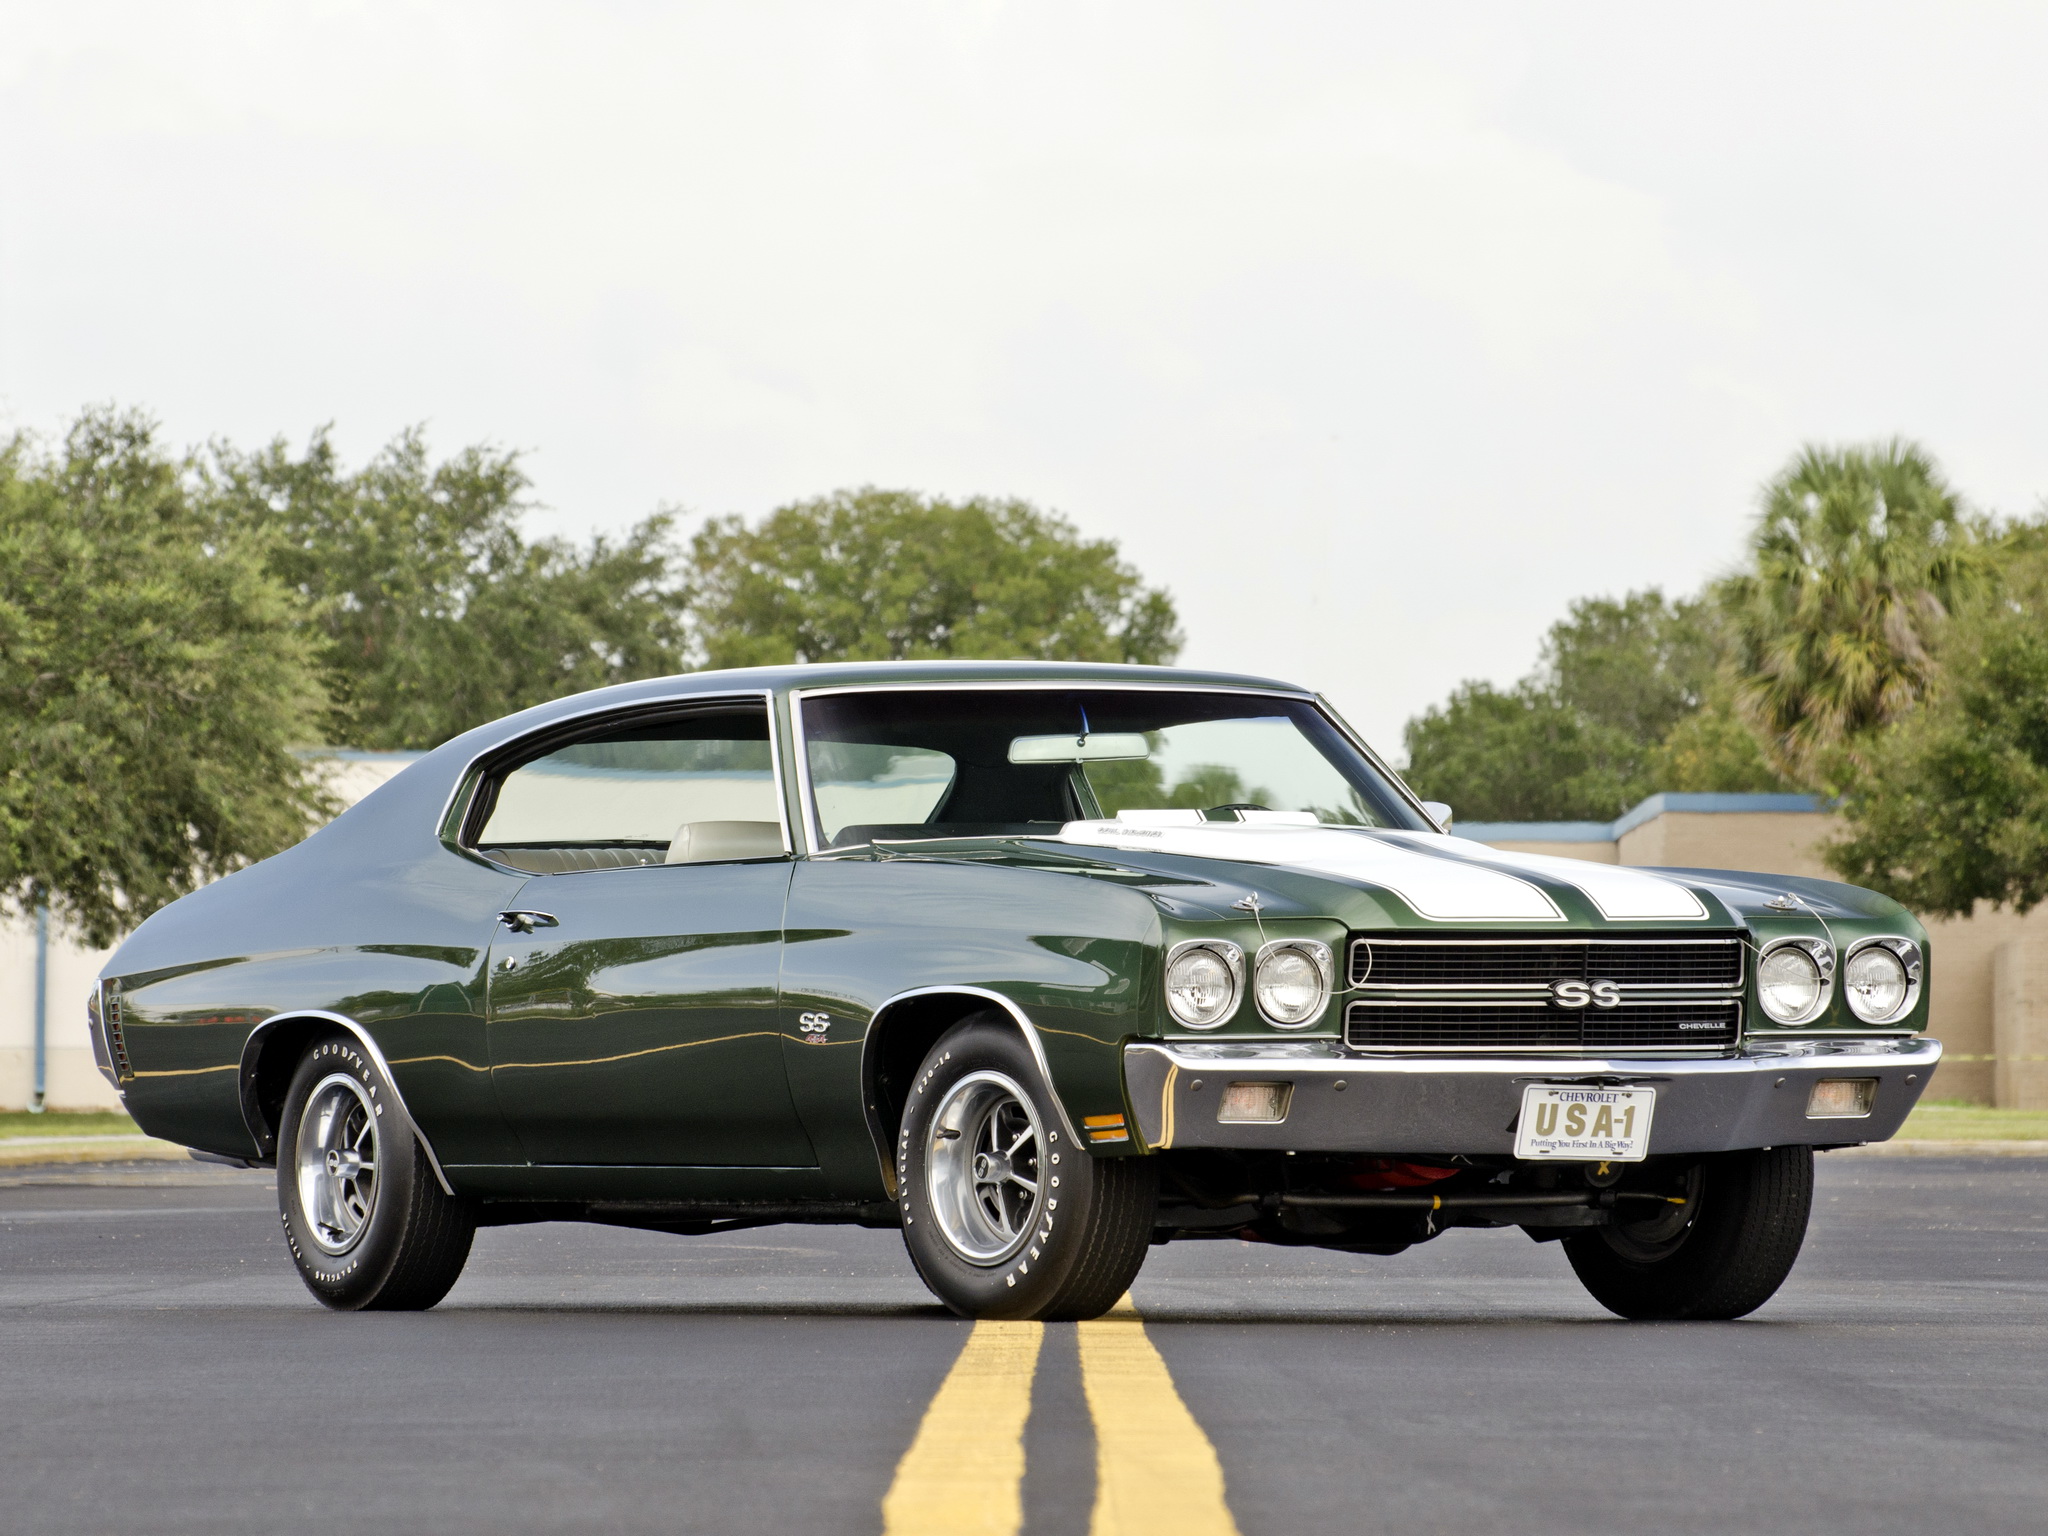 1970 Chevrolet Chevelle SS 454 LS6 Hardtop Coupe muscle classic s s c 2048x1536